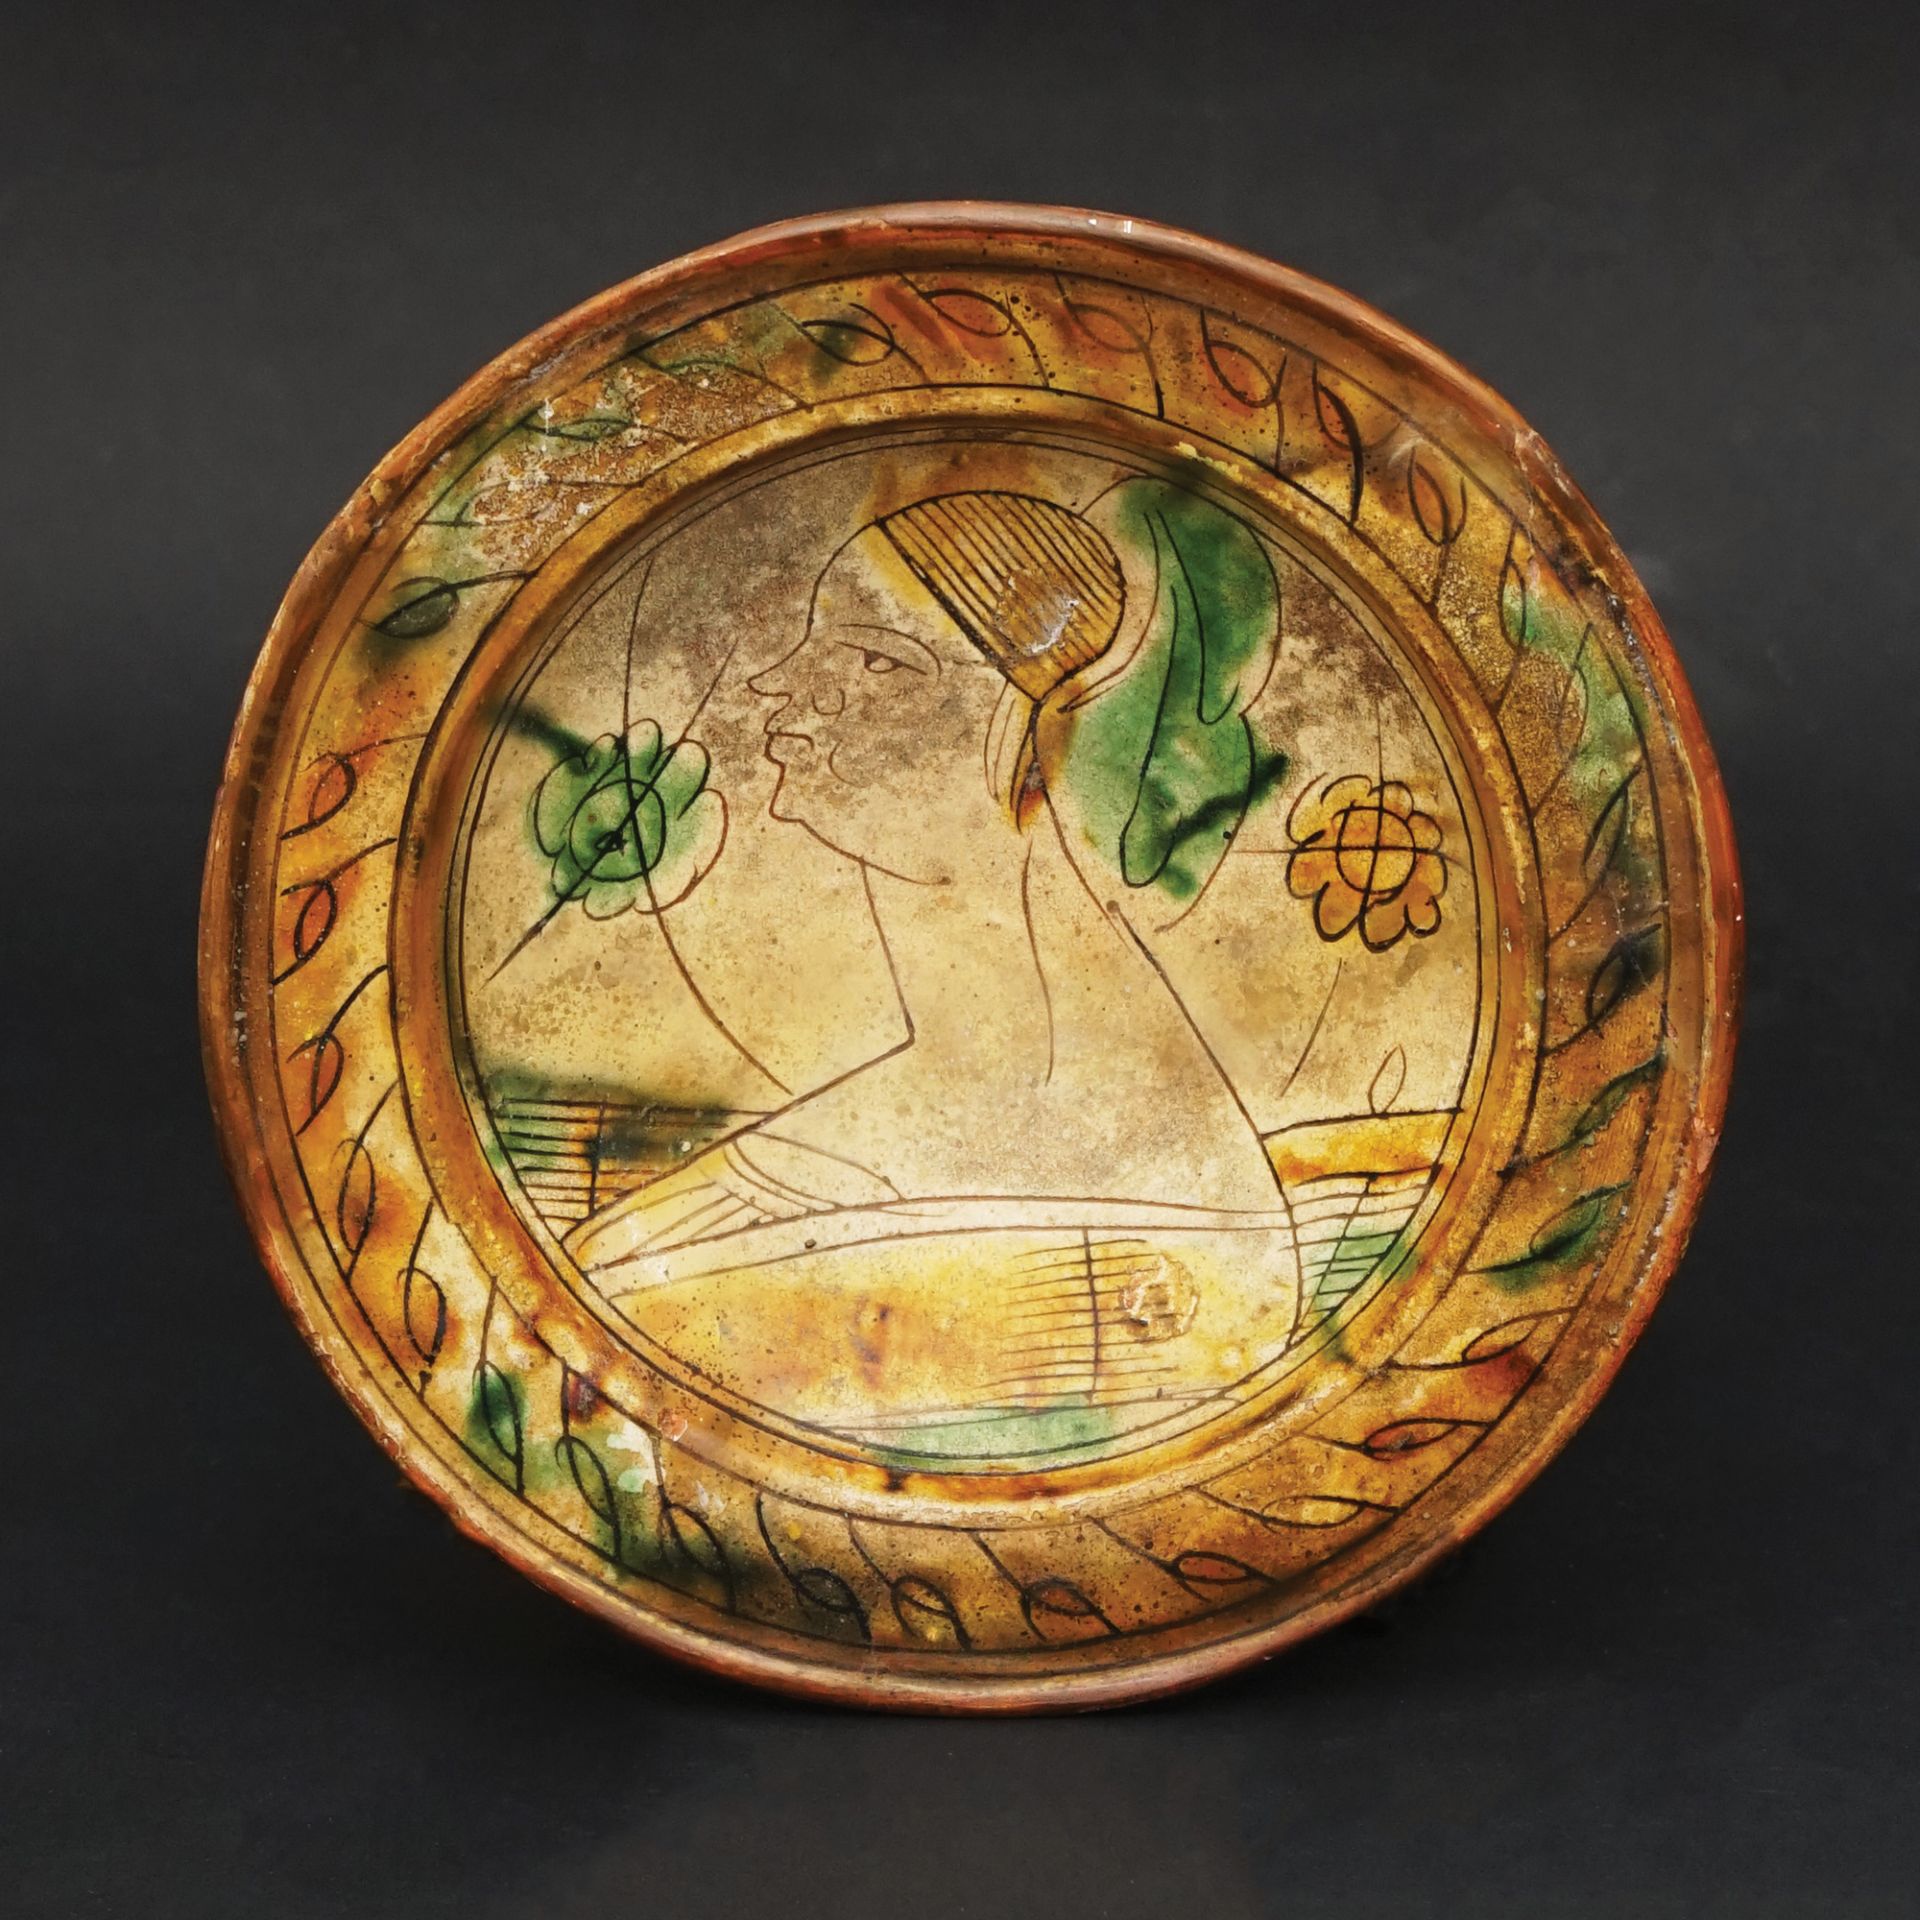 An Italian Po valley scratched maiolica bowl, second half of 15th century